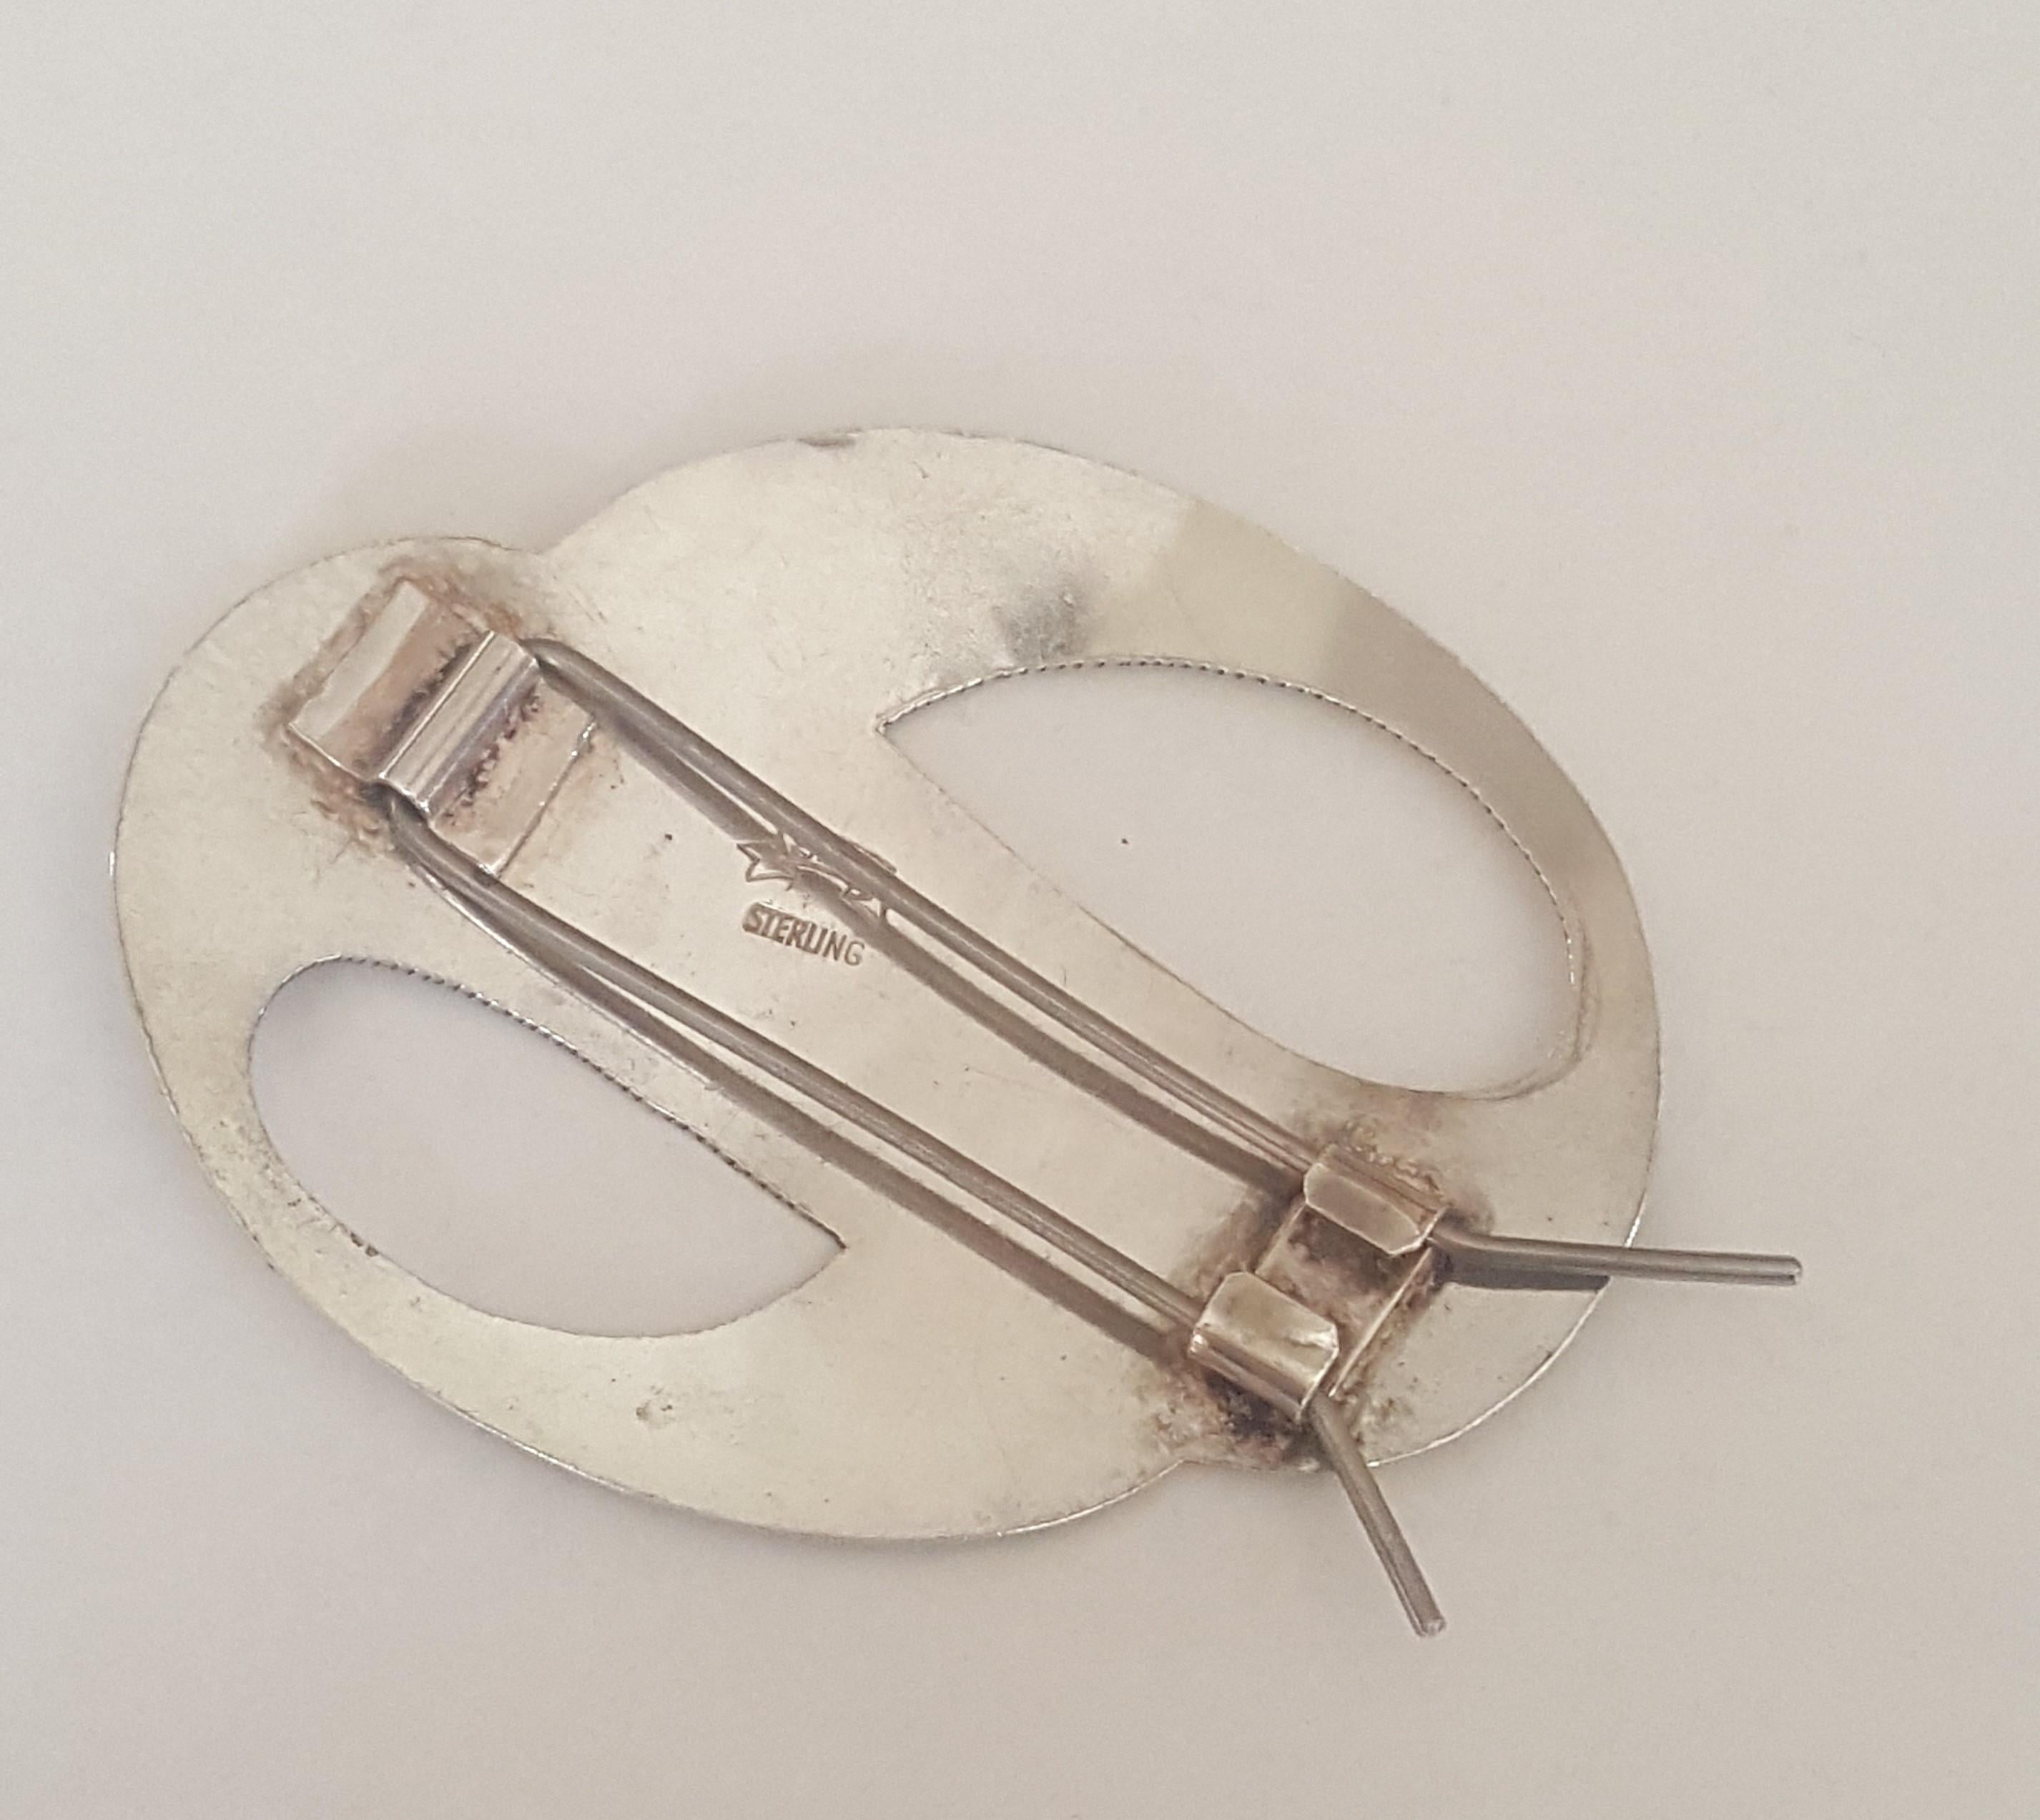 Vintage Sterling Hair Barrette, Beautifully Hand Engraved Western Design, 25.2 Grams, 3 in X 2.25 in, Stamped: Sterling SSS, Very Good Condition.

This barrette makes a nice addition to a collection or for a beautiful hair accessory.

Please let us